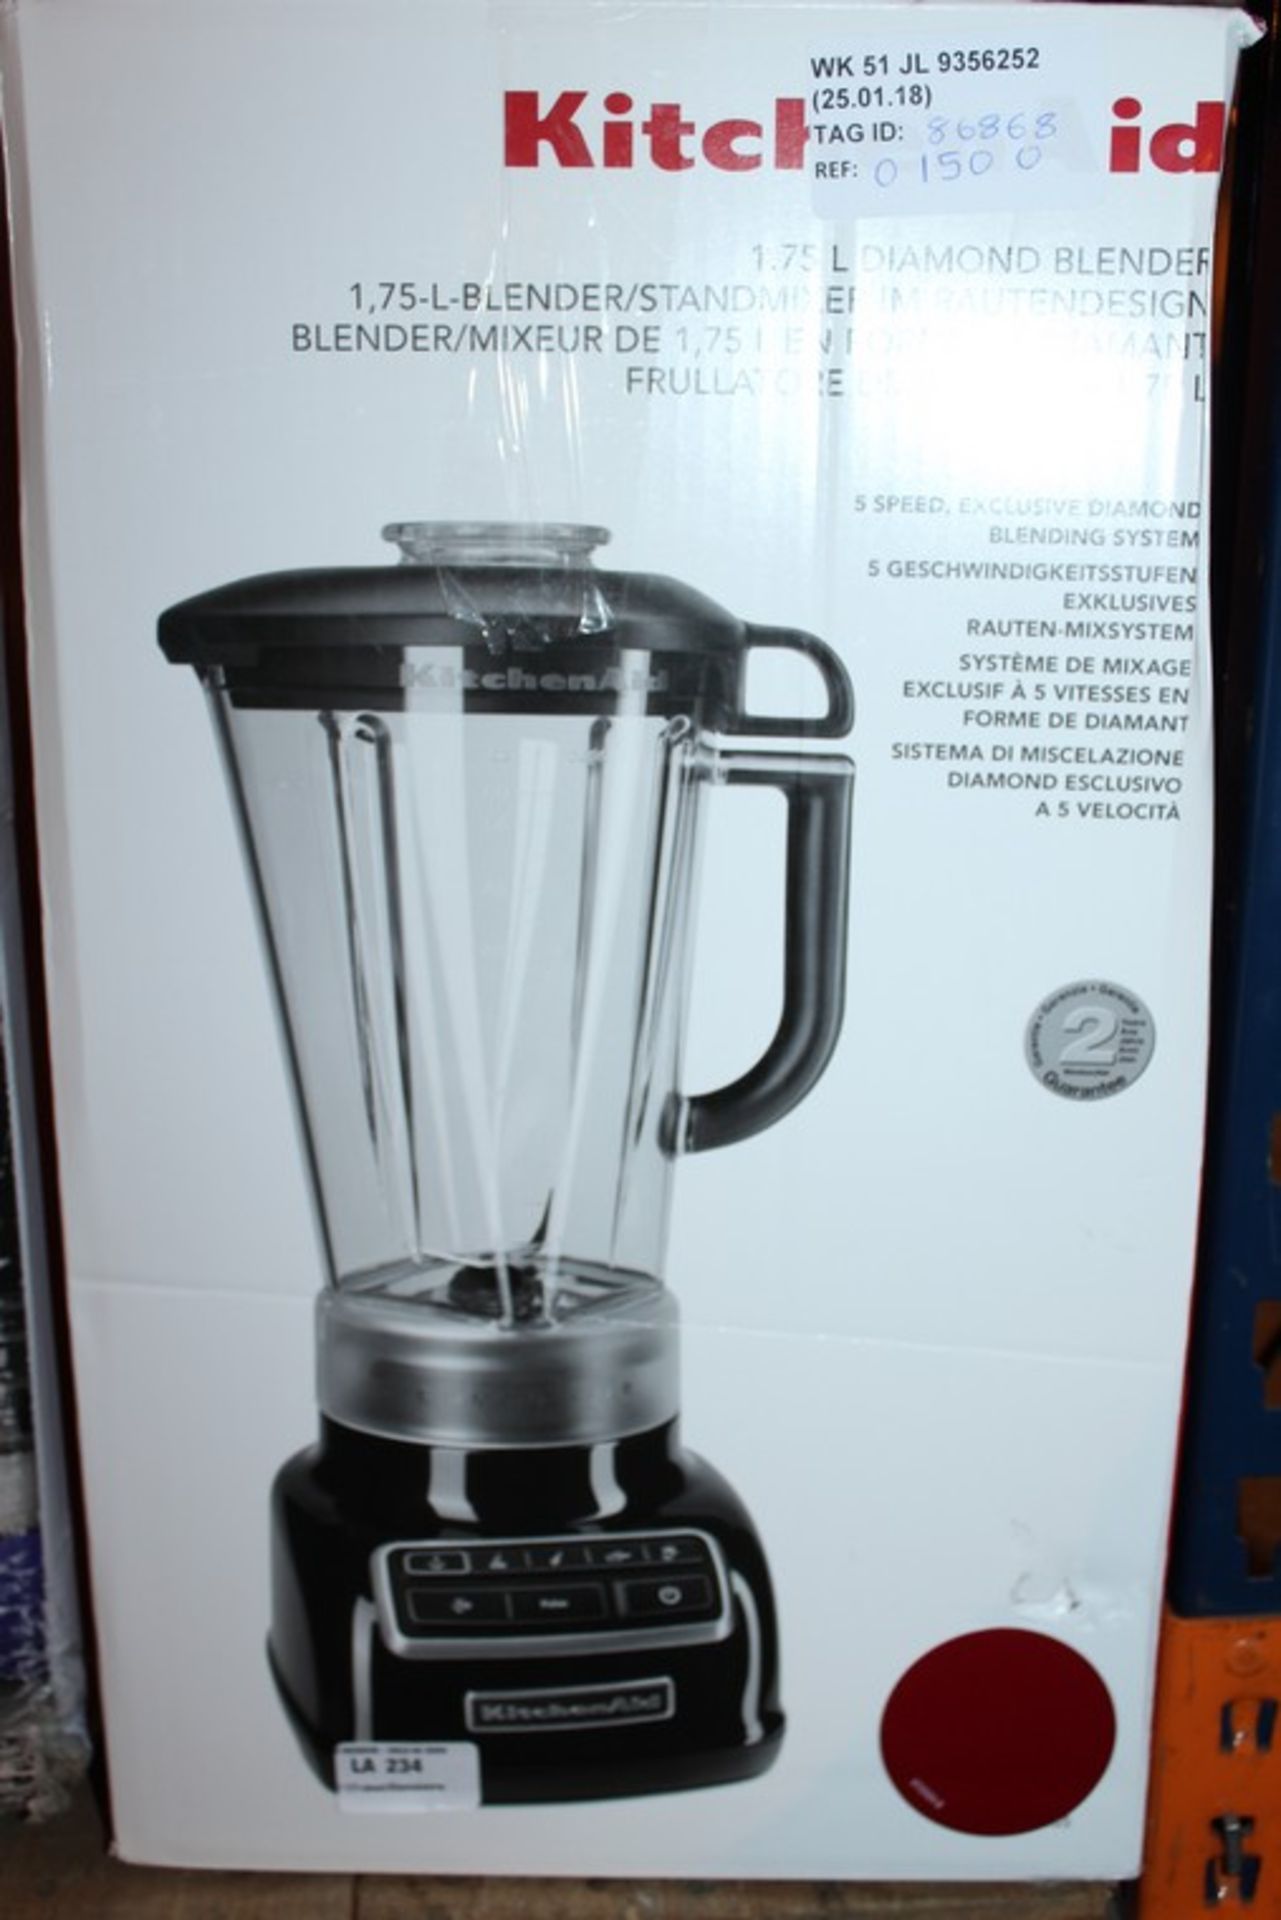 1 x KITCHEN AID 1.75L MIXER RRP £150 (86868) *PLEASE NOTE THAT THE BID PRICE IS MULTIPLIED BY THE